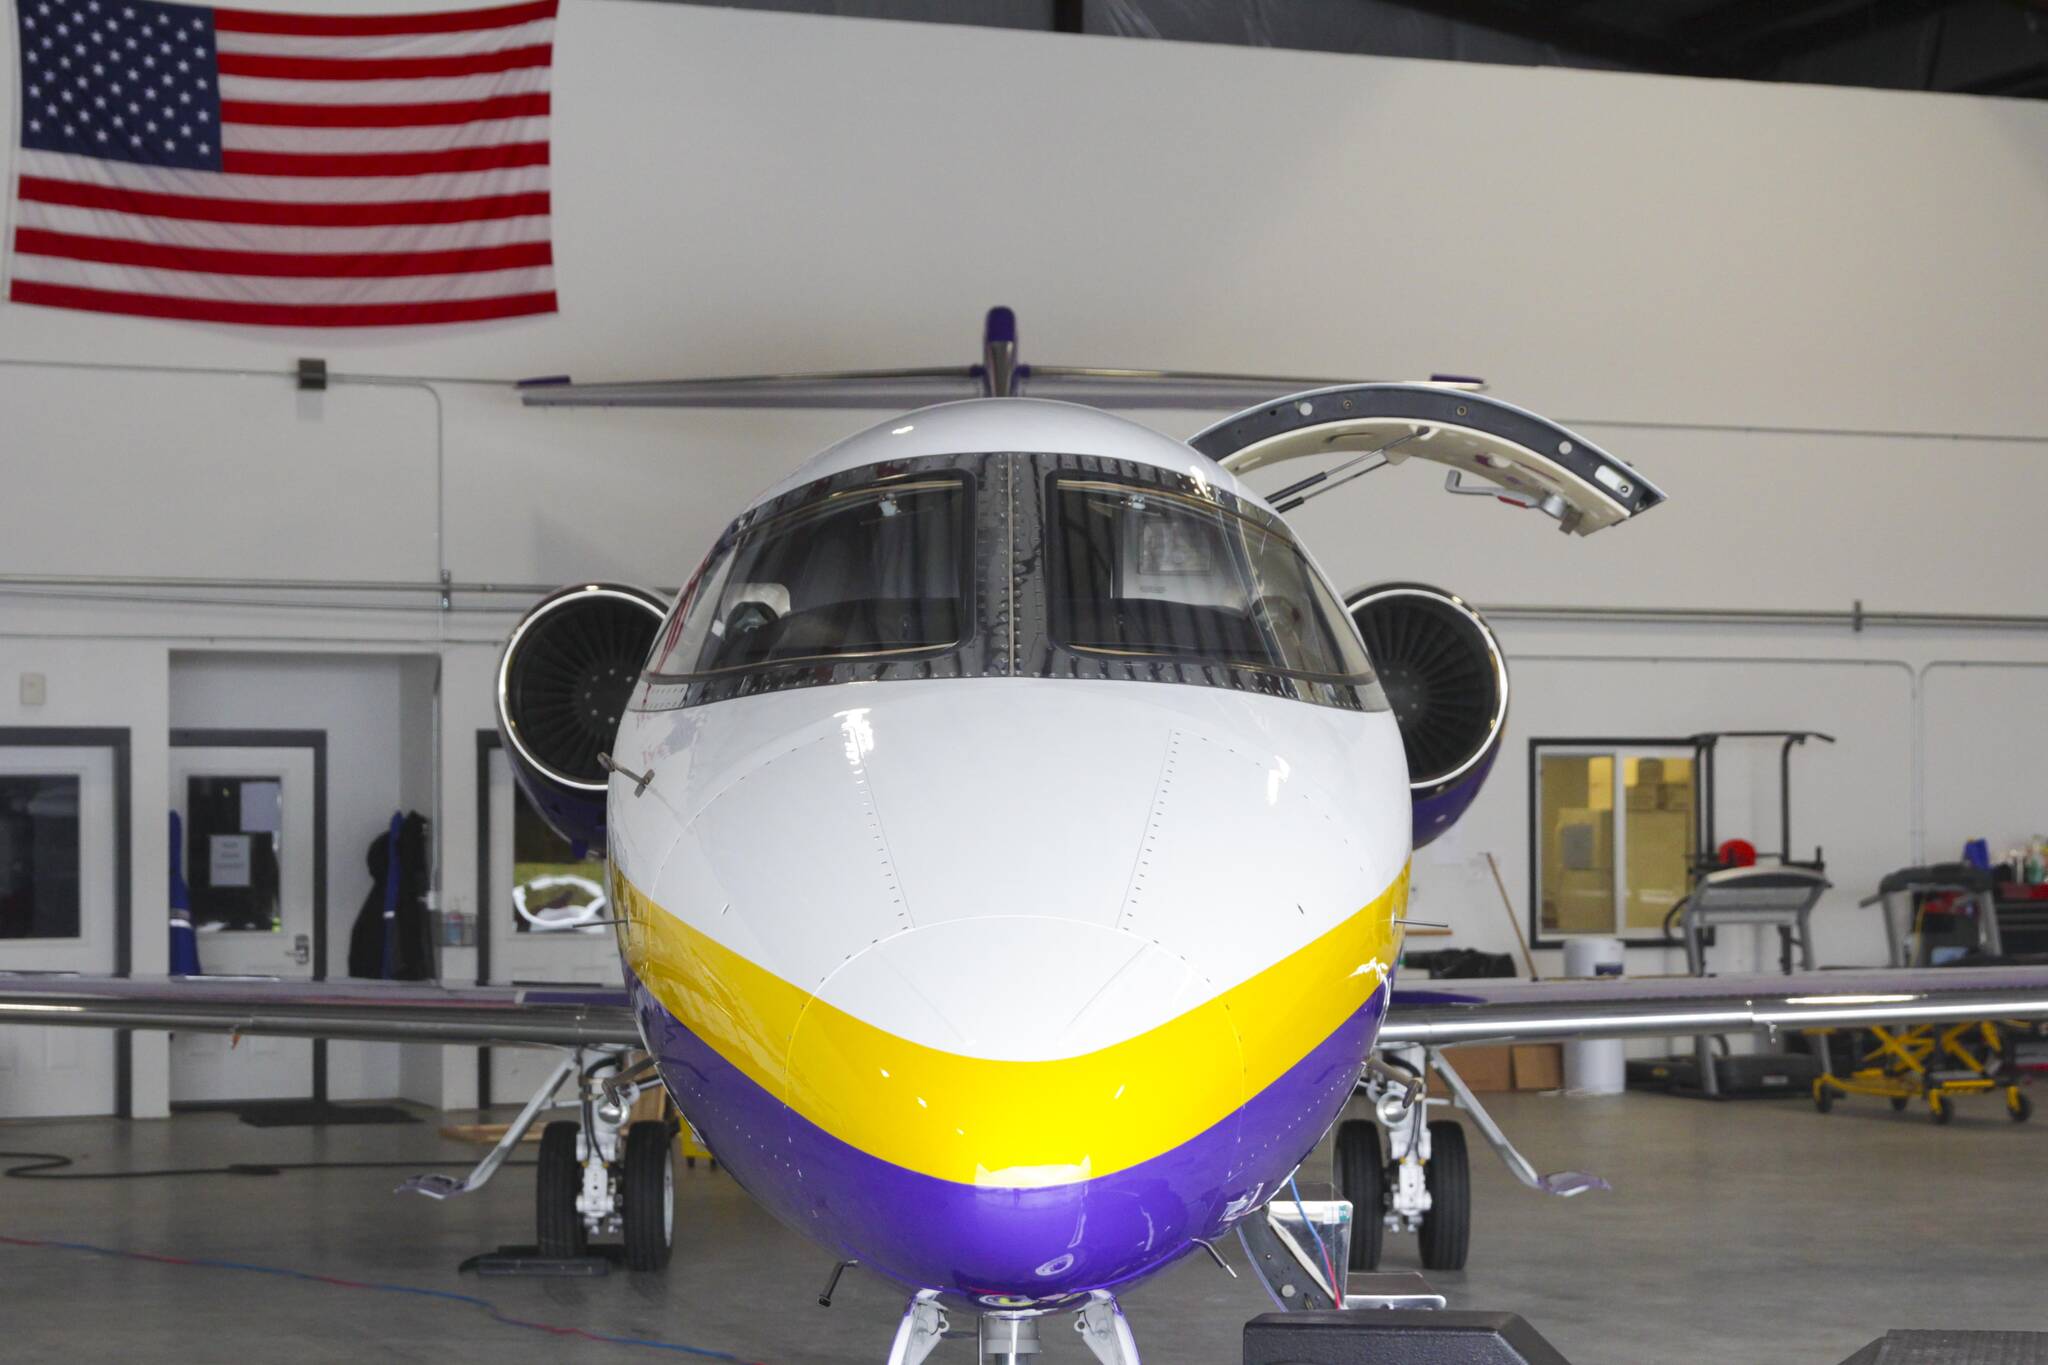 Michael S. Lockett /Juneau Empire 
Airlift Northwest’s new Learjet 45XR has longer range than its older models, allowing to make longer flights without refueling and spend less time getting critically injured patients to advanced care.